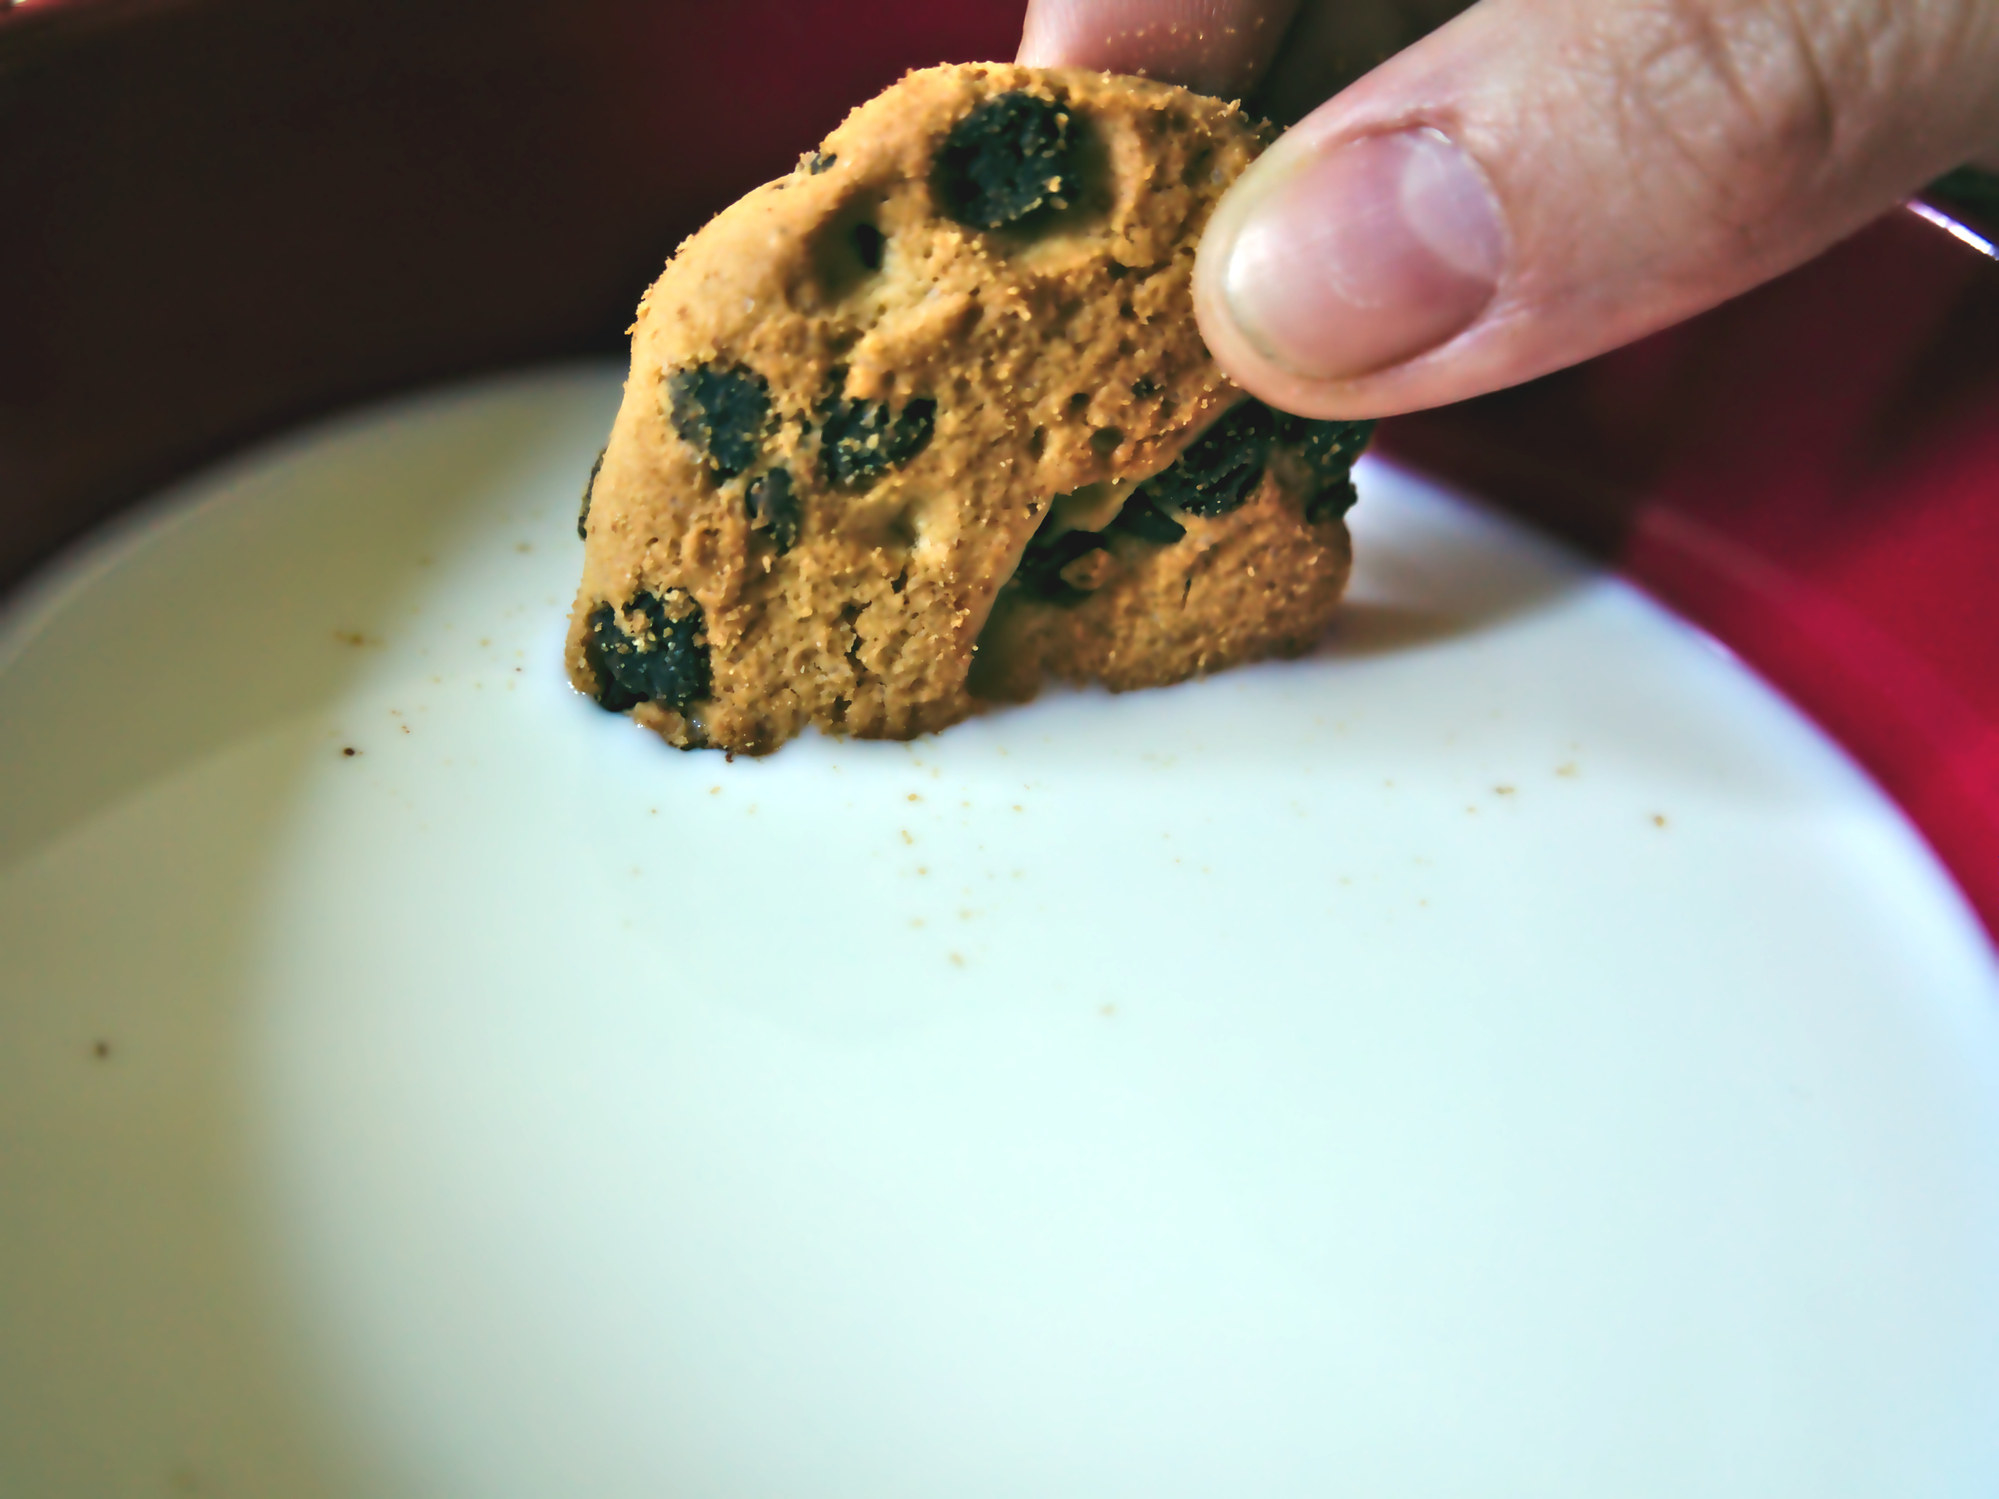 Dunking a cookie into milk.